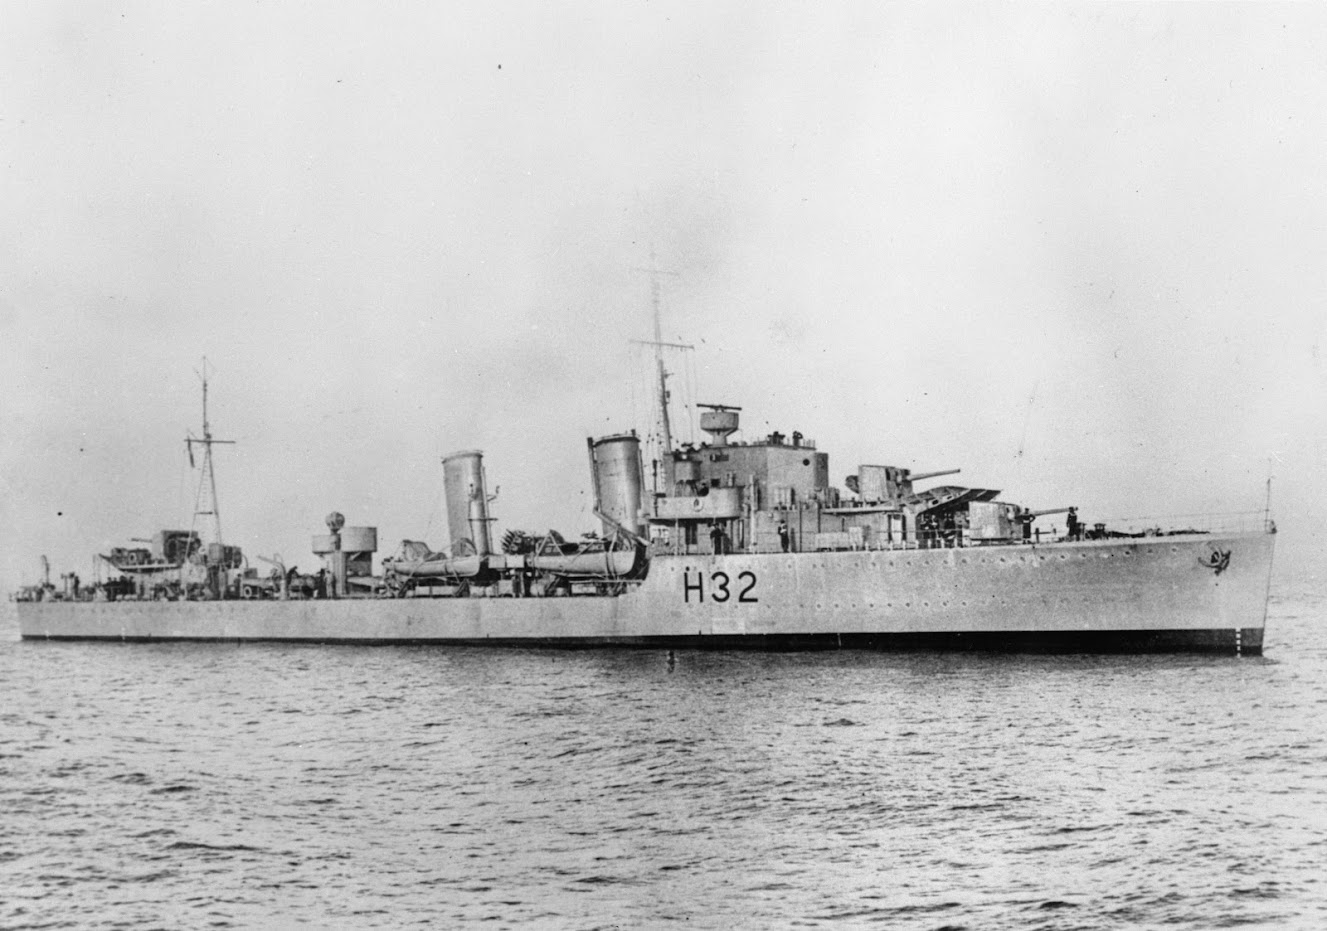 A black and white image of a Second World War destroyer ship on open water